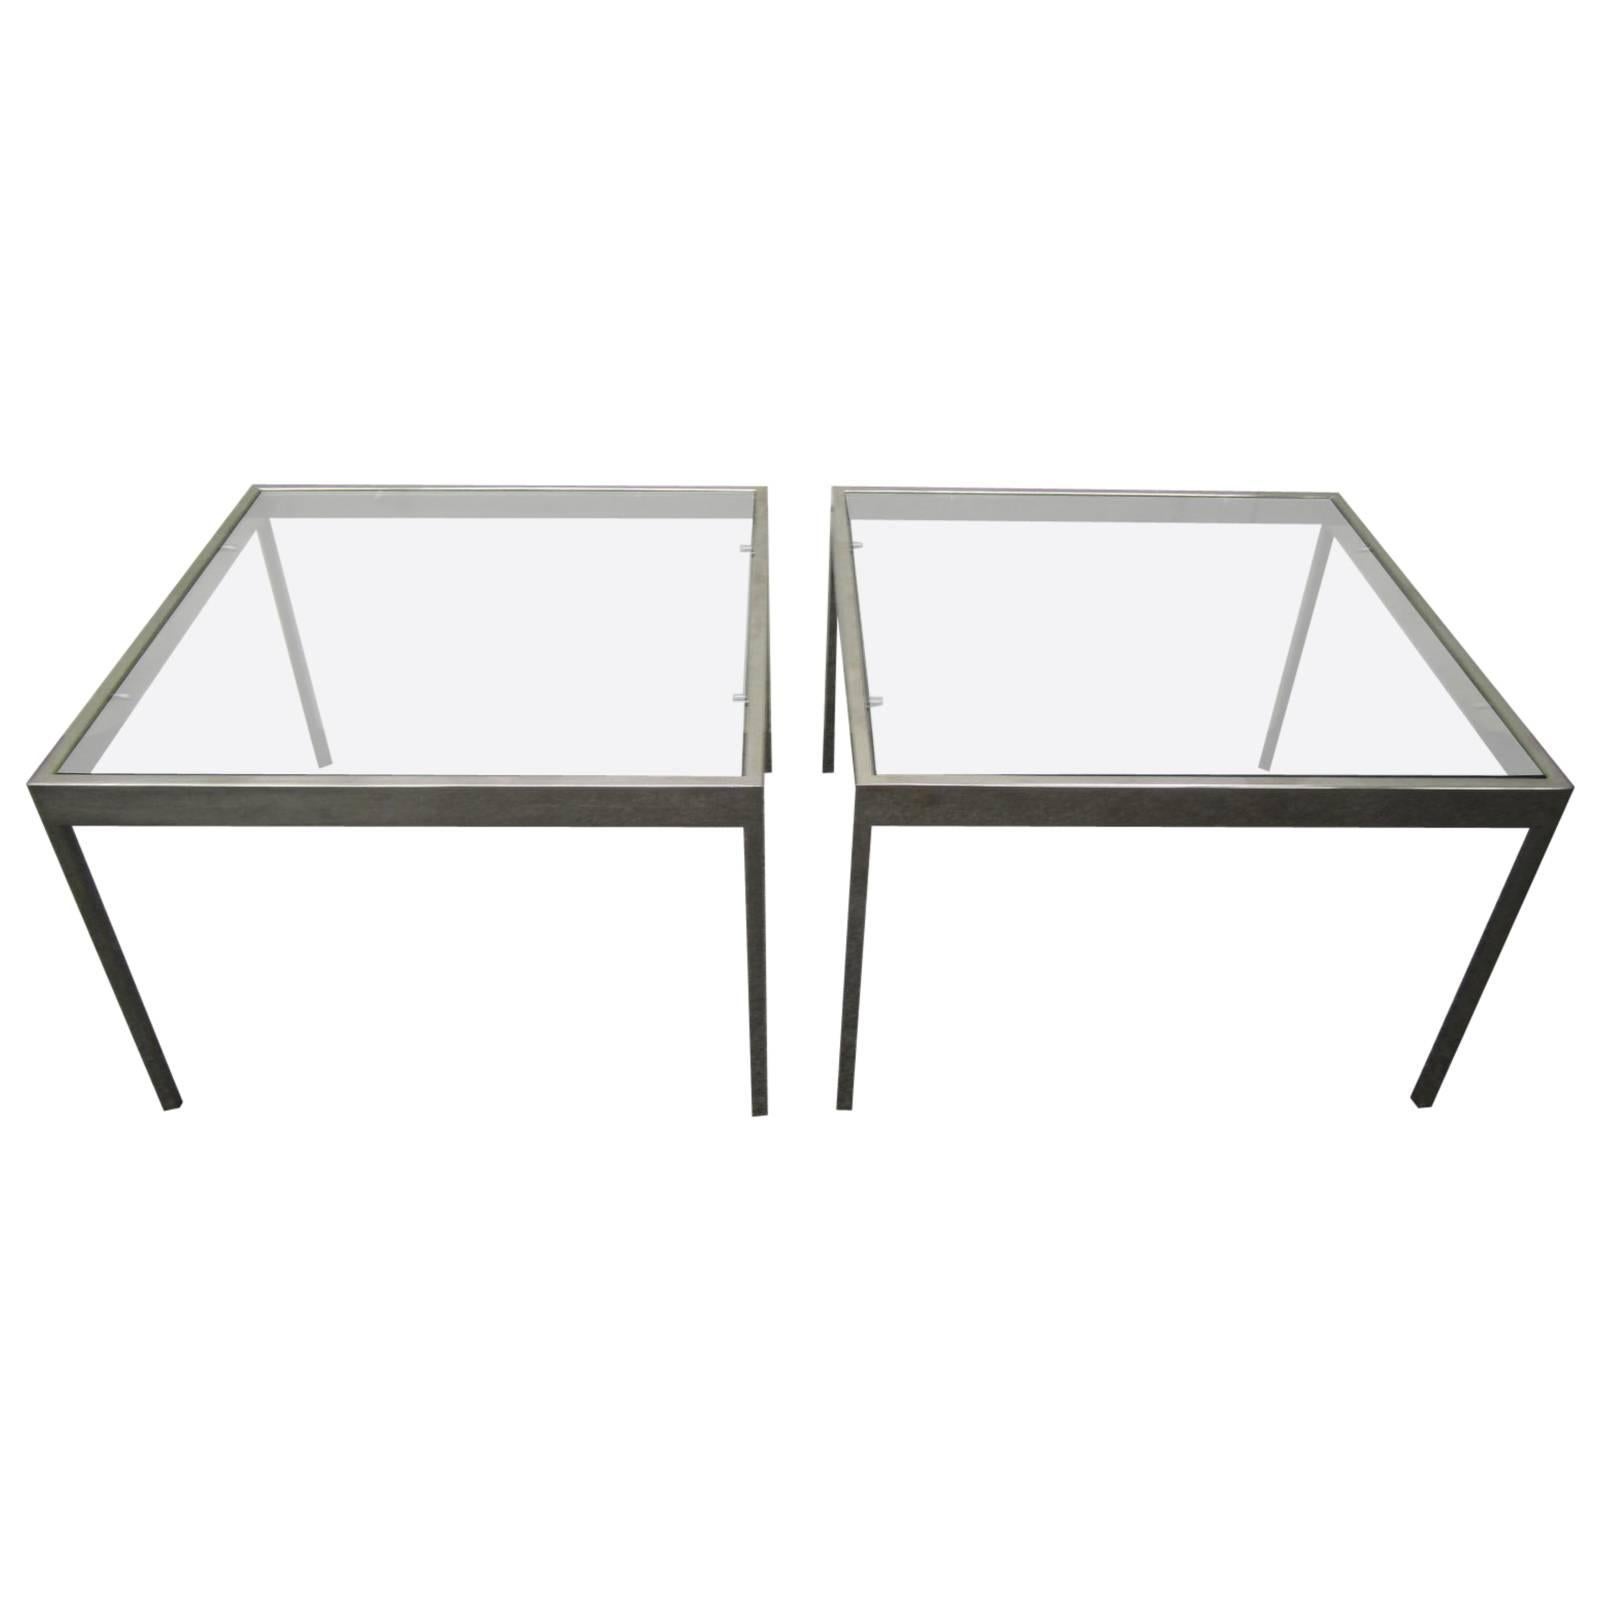 Handsome Pair of Milo Baughman Chrome Square Side End Tables Mid-century Modern